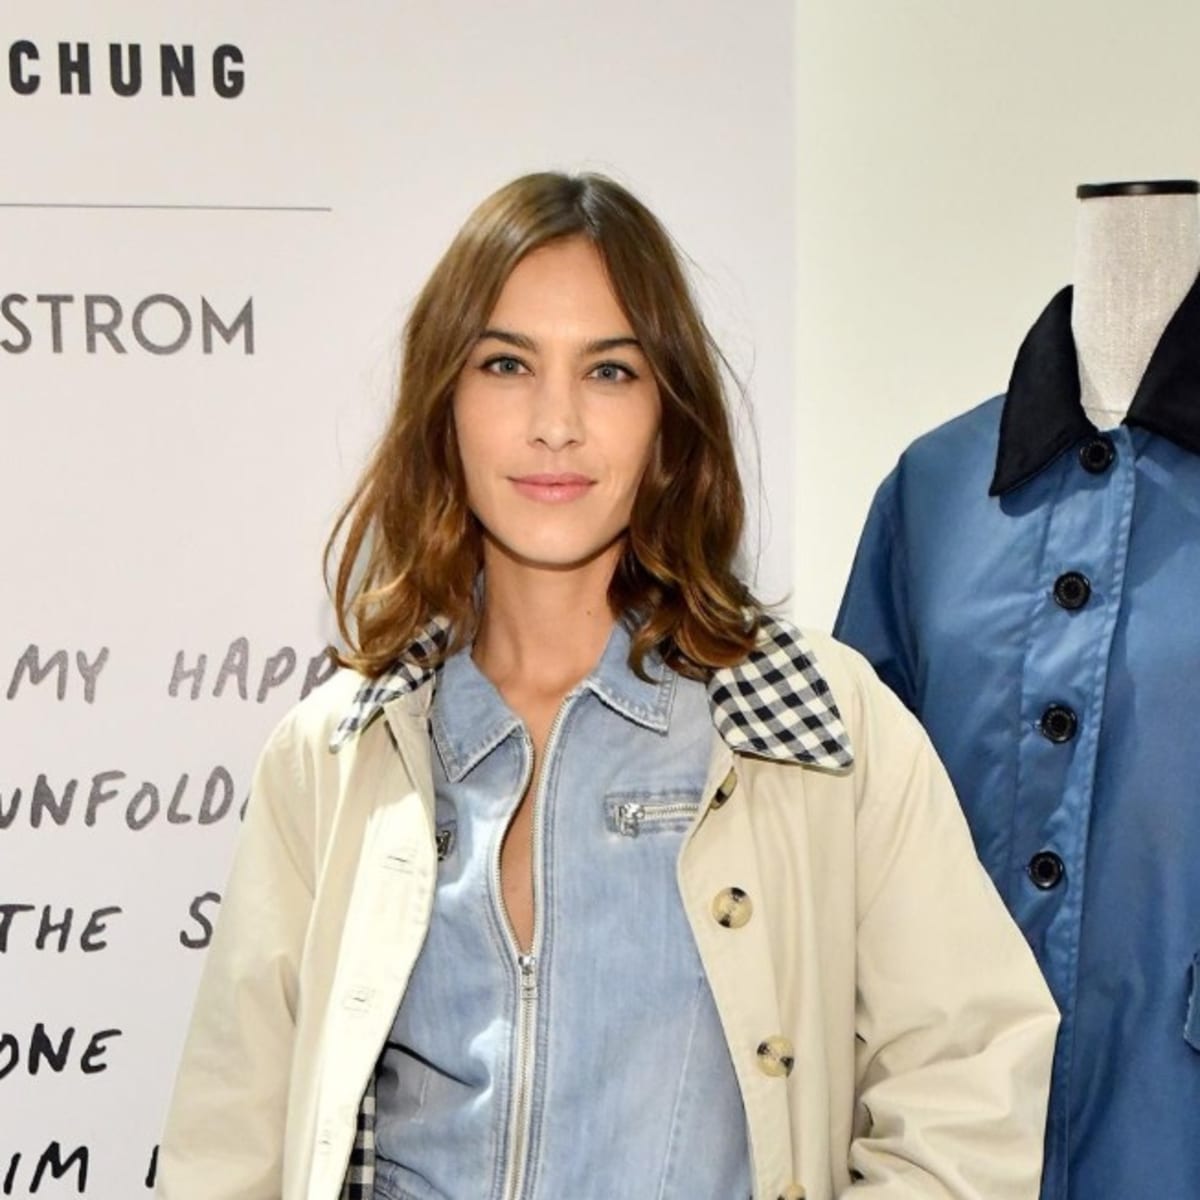 Alexa Chung makes us want to own a fancy leather coat